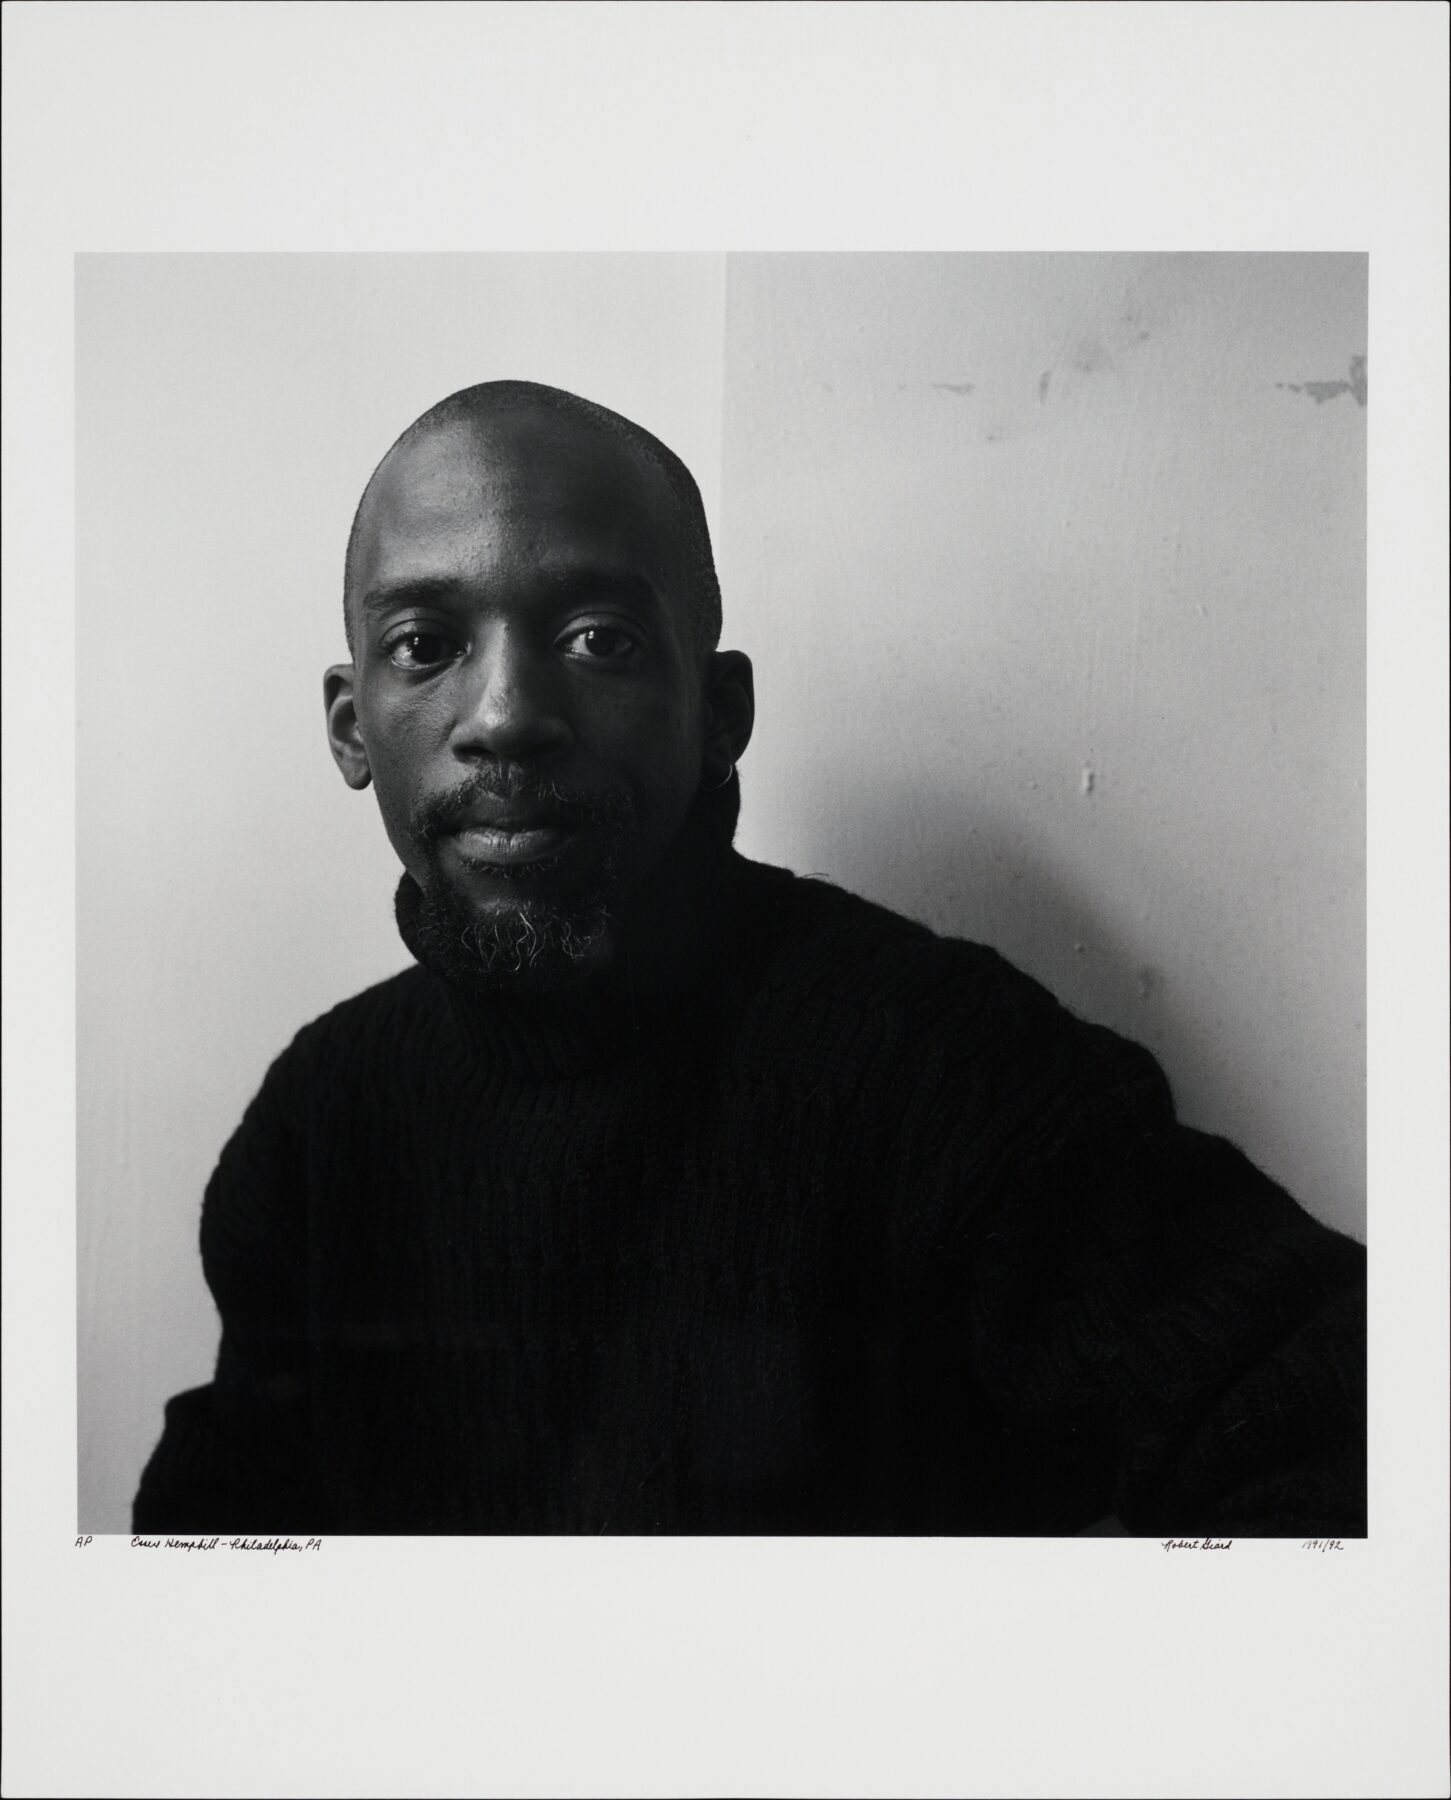 Essex Hemphill. Photo used with permission granted from Estate of Robert Giard.